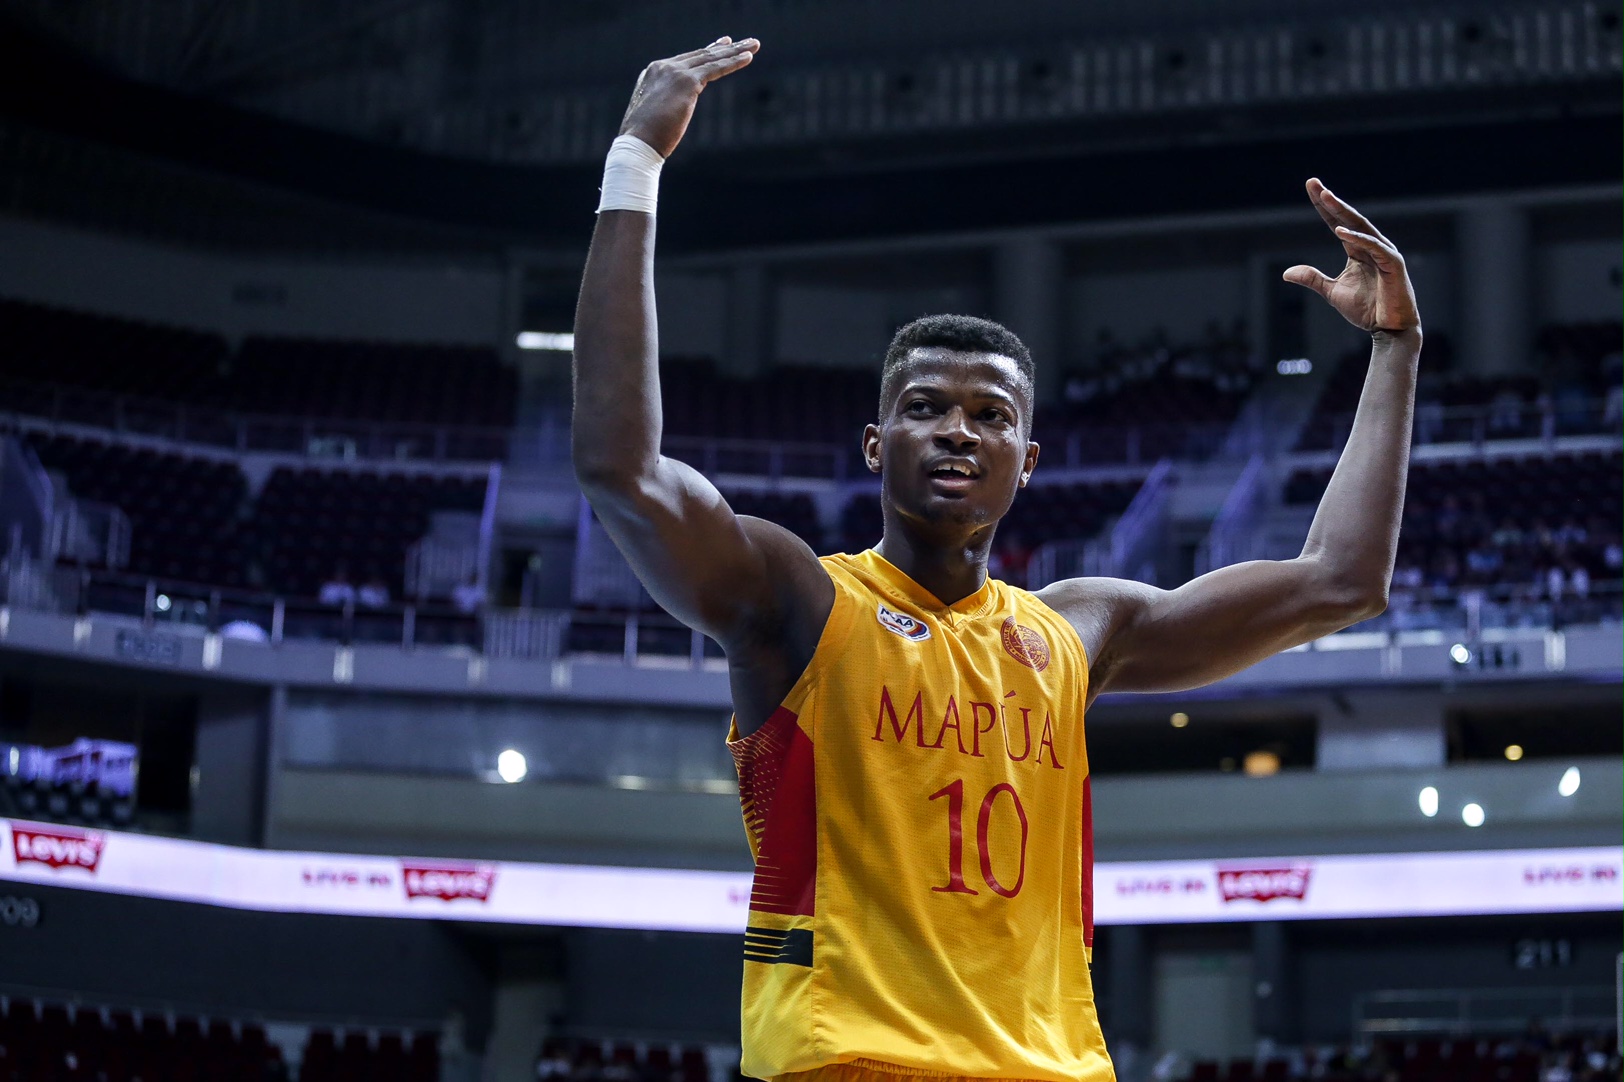 Allwell Oraeme pumping up the crowd. Photo by Tristan Tamayo/INQUIRER.net